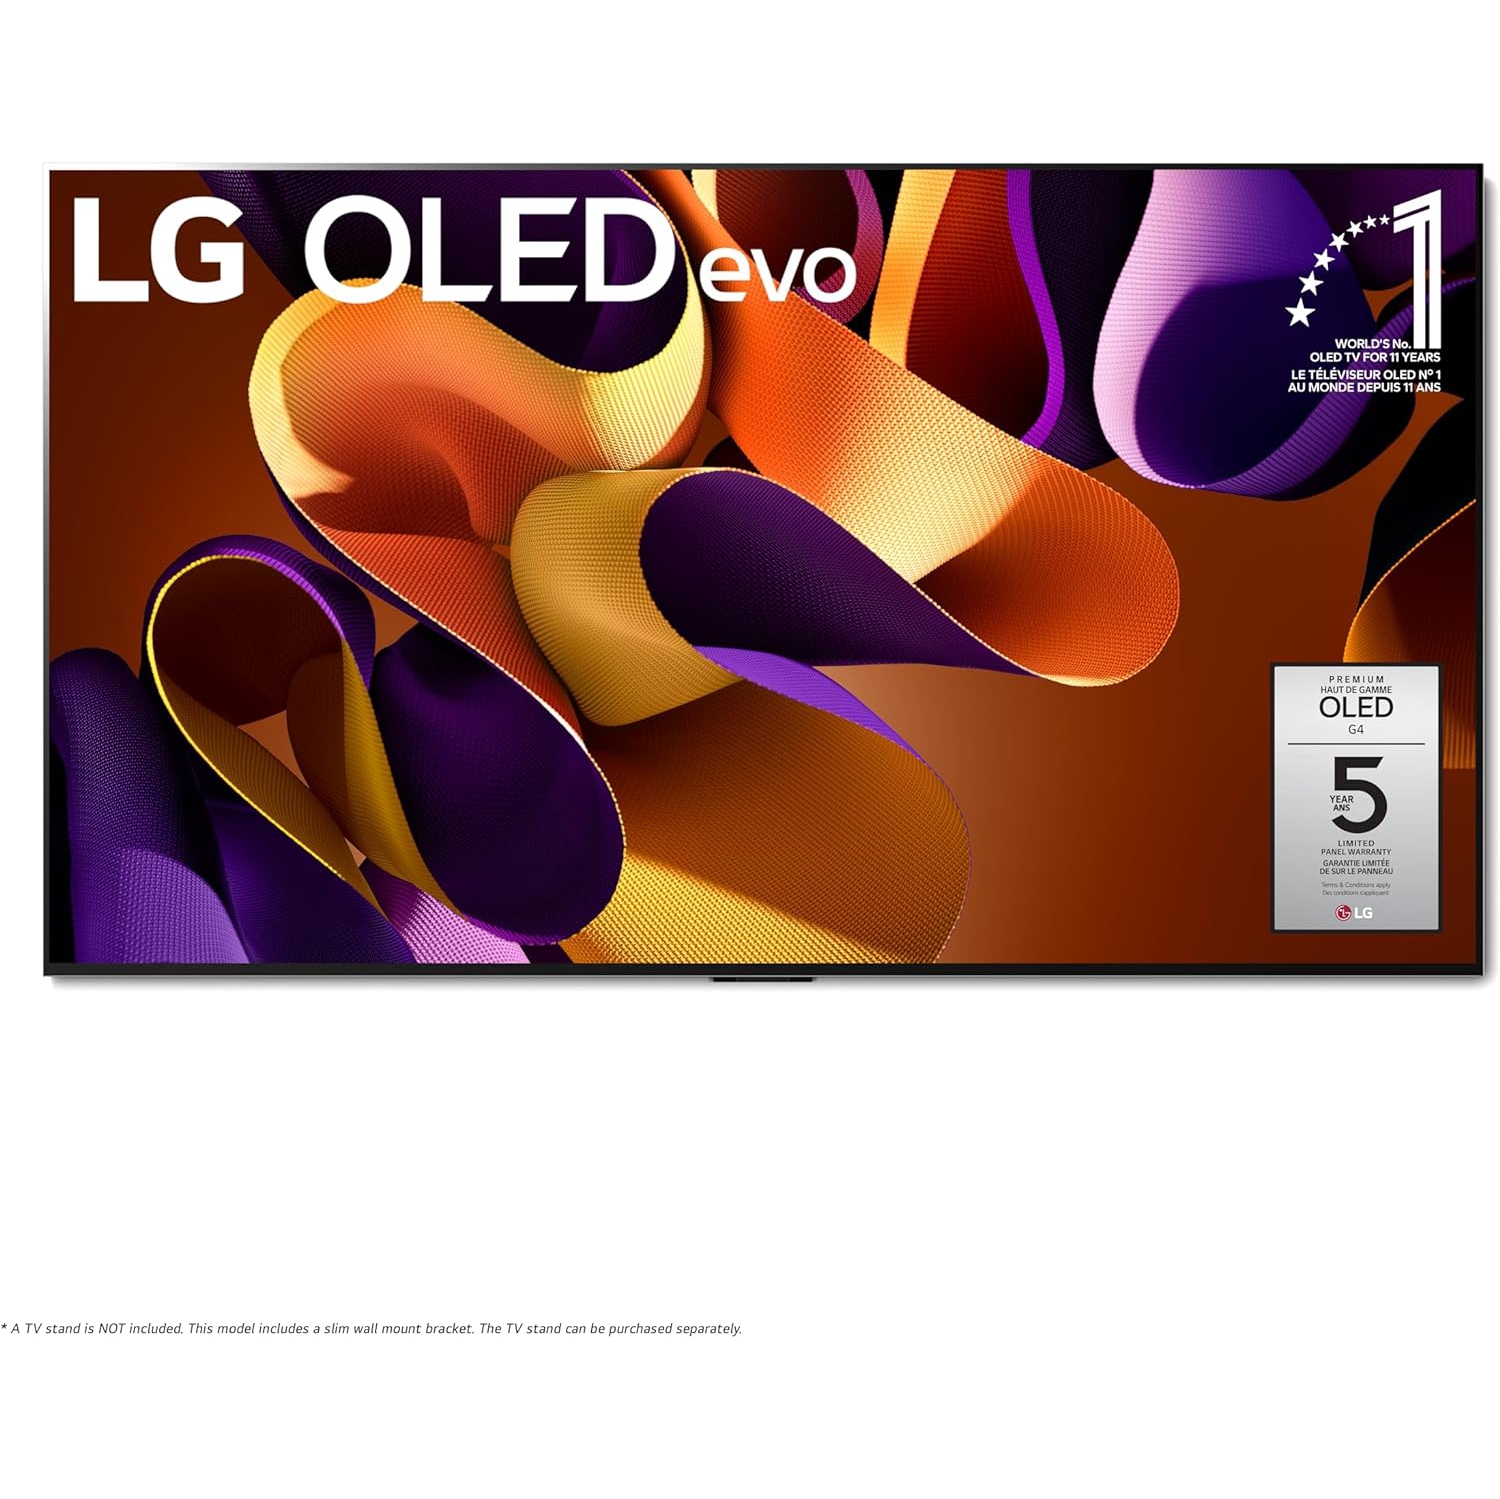 LG 77-Inch G4 OLED evo 4K Smart TV - α11 AI Processor 4K, Alexa Built-in, 144Hz Refresh Rate,Dolby Vision,Wall Mount Included (OLED77G4WUA) - Open Box -10/10 Condition